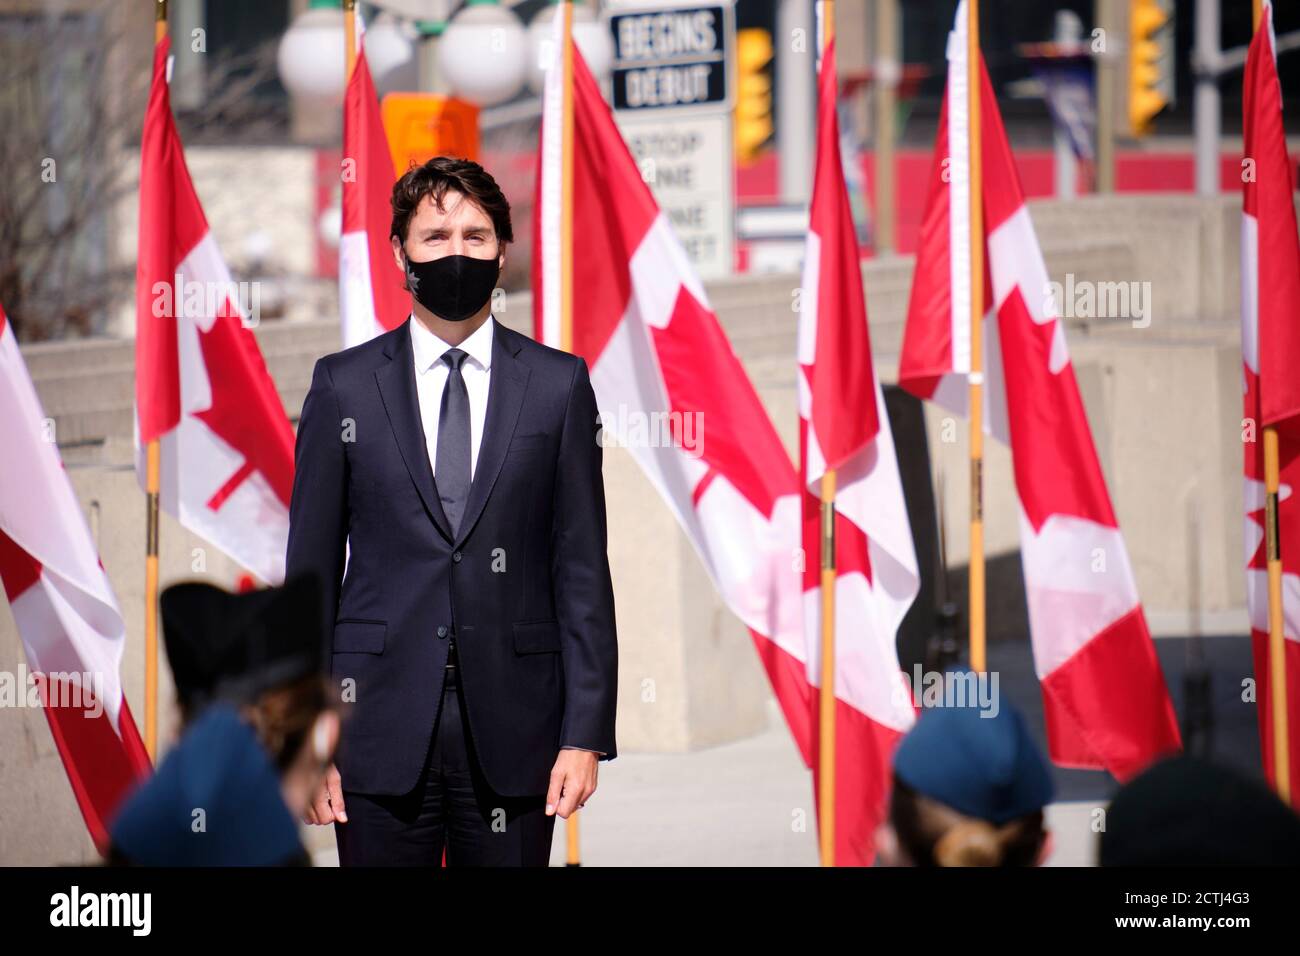 Ottawa, Canada. September 23rd, 2020. Canadian Prime Minister, Justin Trudeau arrives at the Canadian Senate for the Speech of the Throne. The current parliament was prorogued a month ago as a reset after a difficult year for the Liberal minority government, from the on-going Pandemic to scandals, and the new Throne Speech is used as a reset to present to Canadians how the government plans to rebuild from the impact of the pandemic. Credit: meanderingemu/Alamy Live News Stock Photo